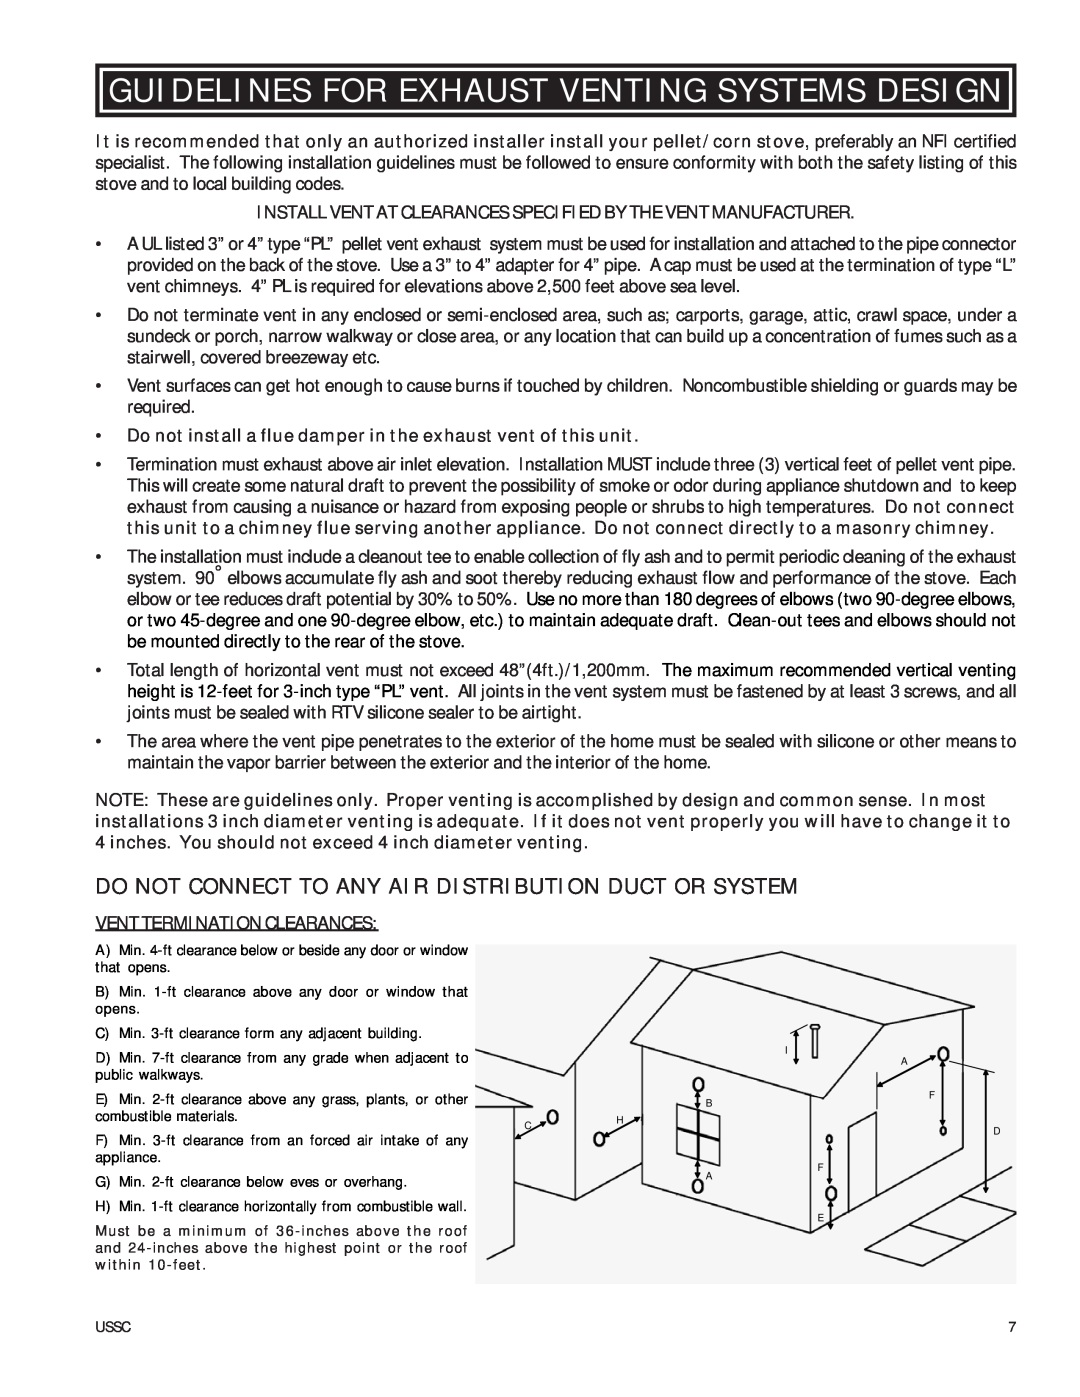 United States Stove 6039T owner manual Guidelines For Exhaust Venting Systems Design, Ventterminationclearances 